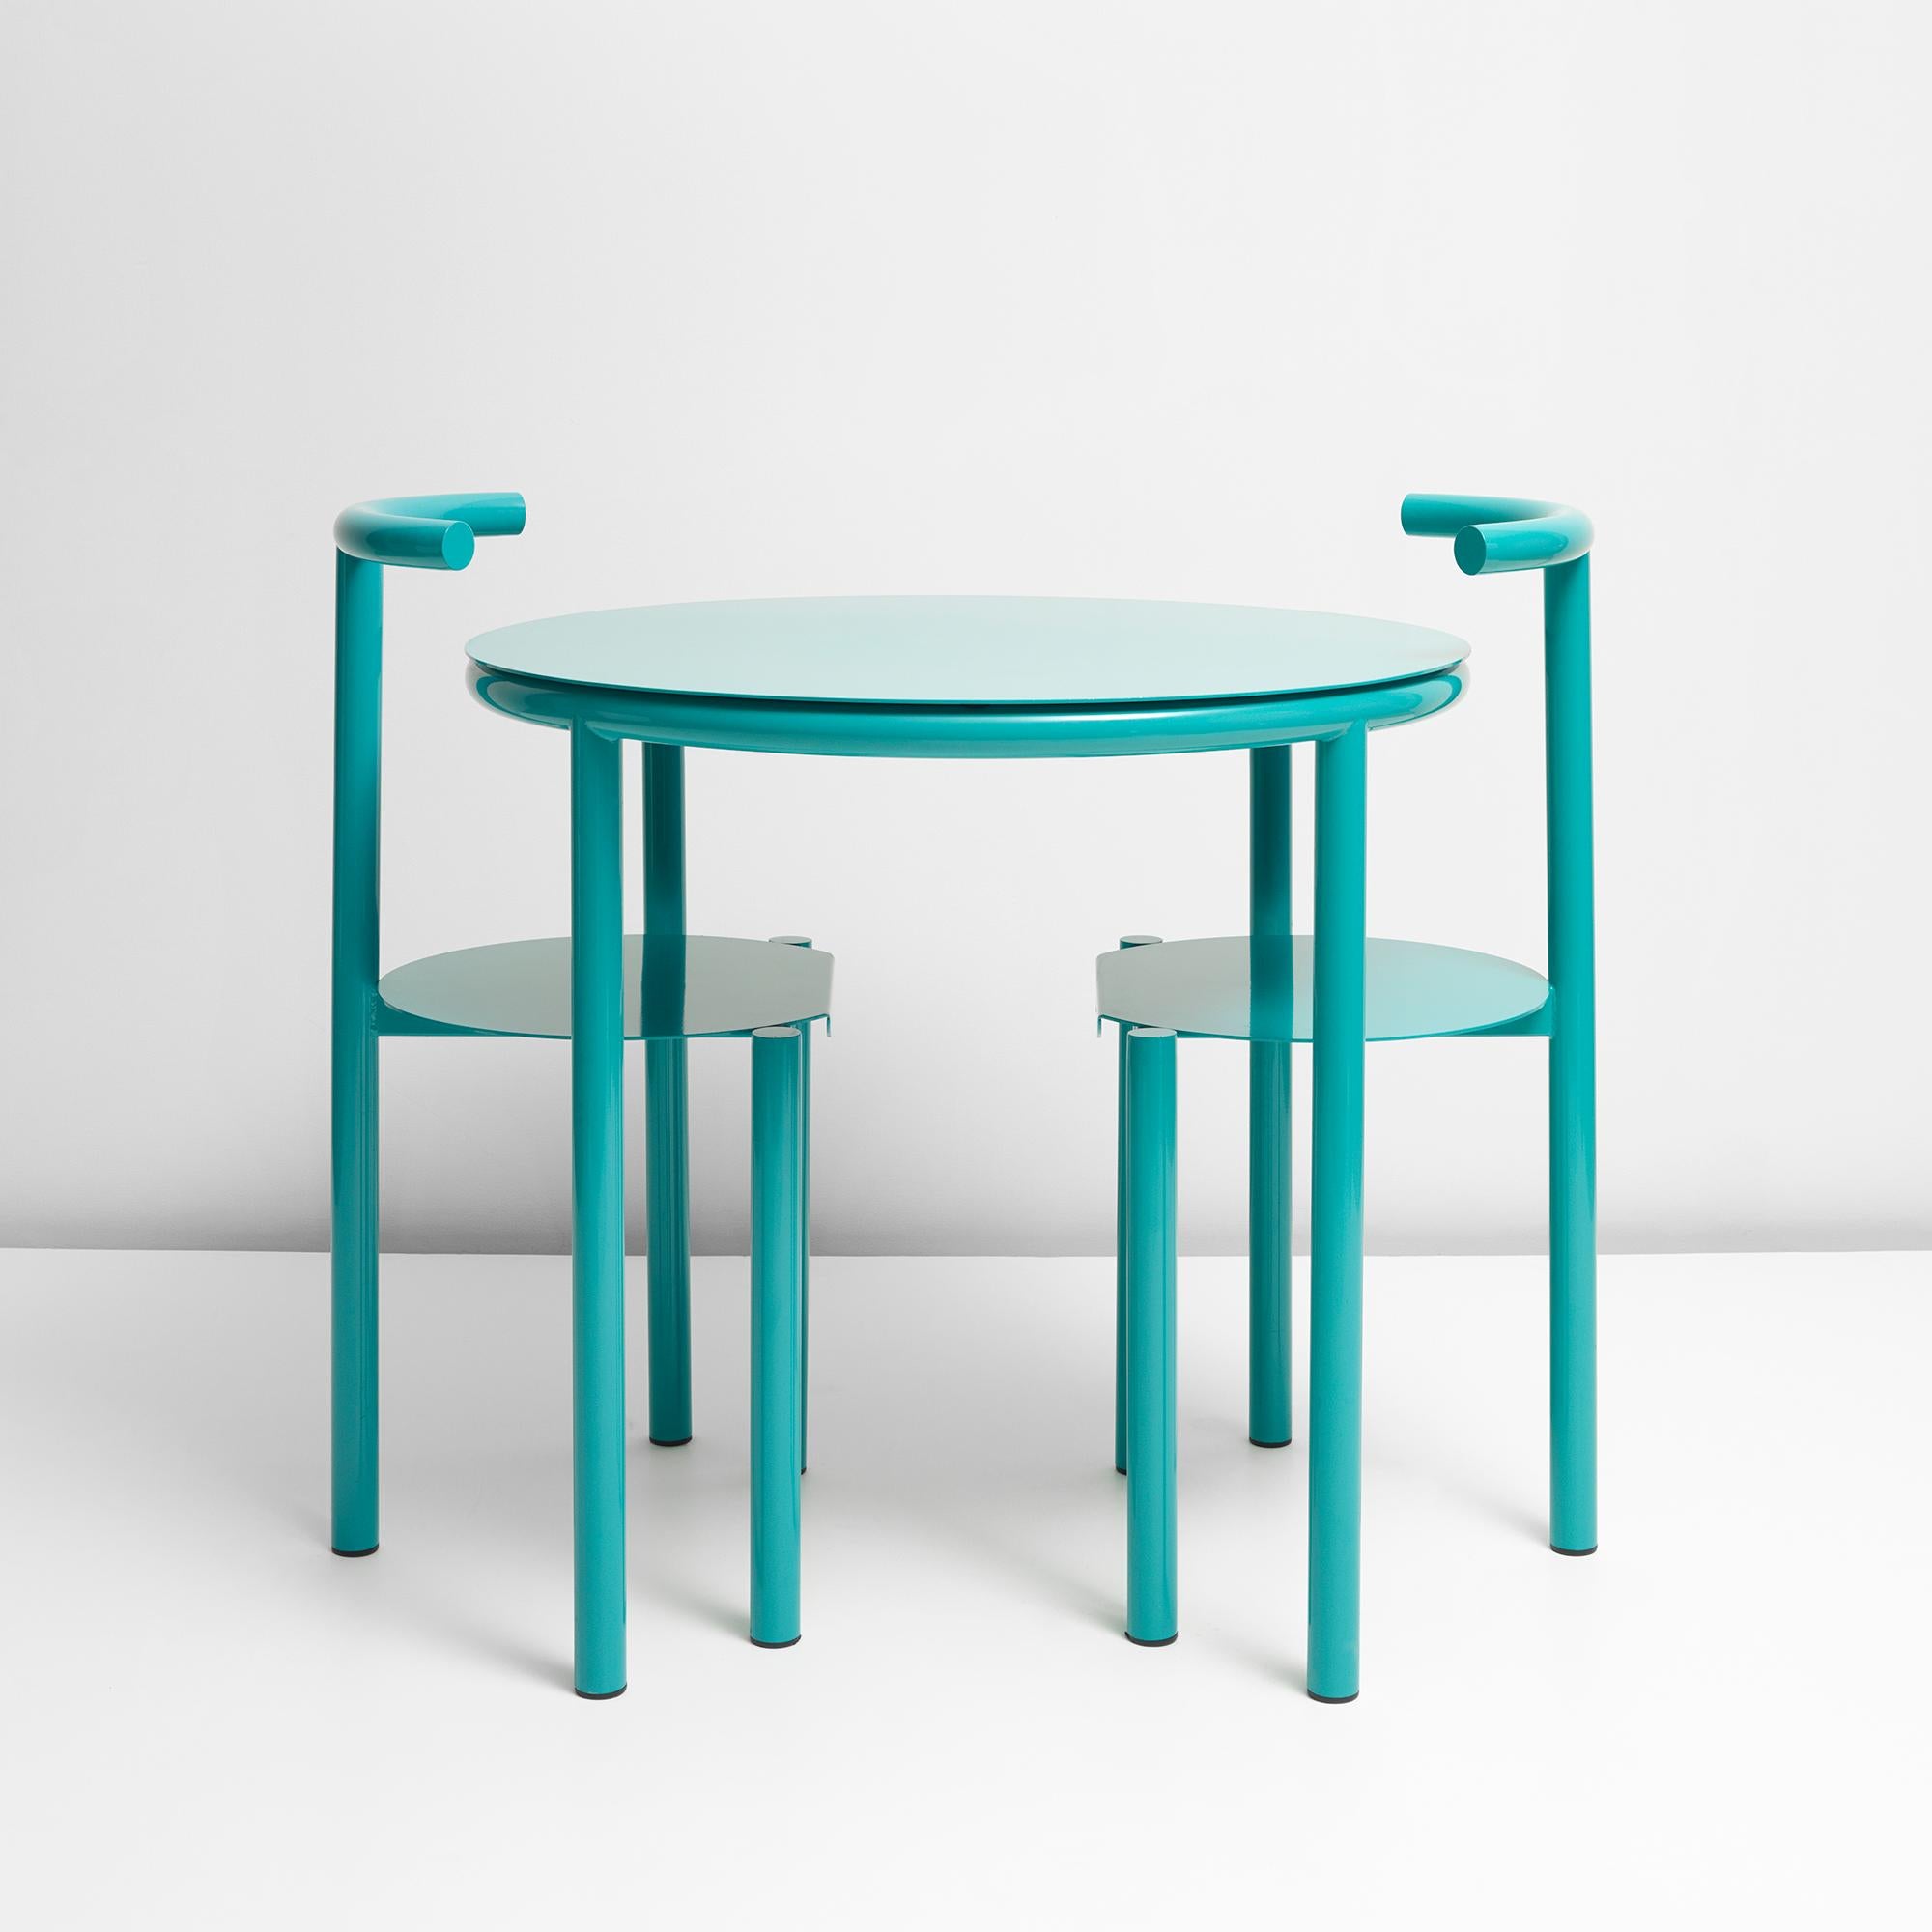 A cafe table sold here with 2 of its partner the B Series chair.

The B - Series takes the graphical shapes found in the urban environment and reimagines them in to a bold statement pieces. With both post-modernist and modernist influences that